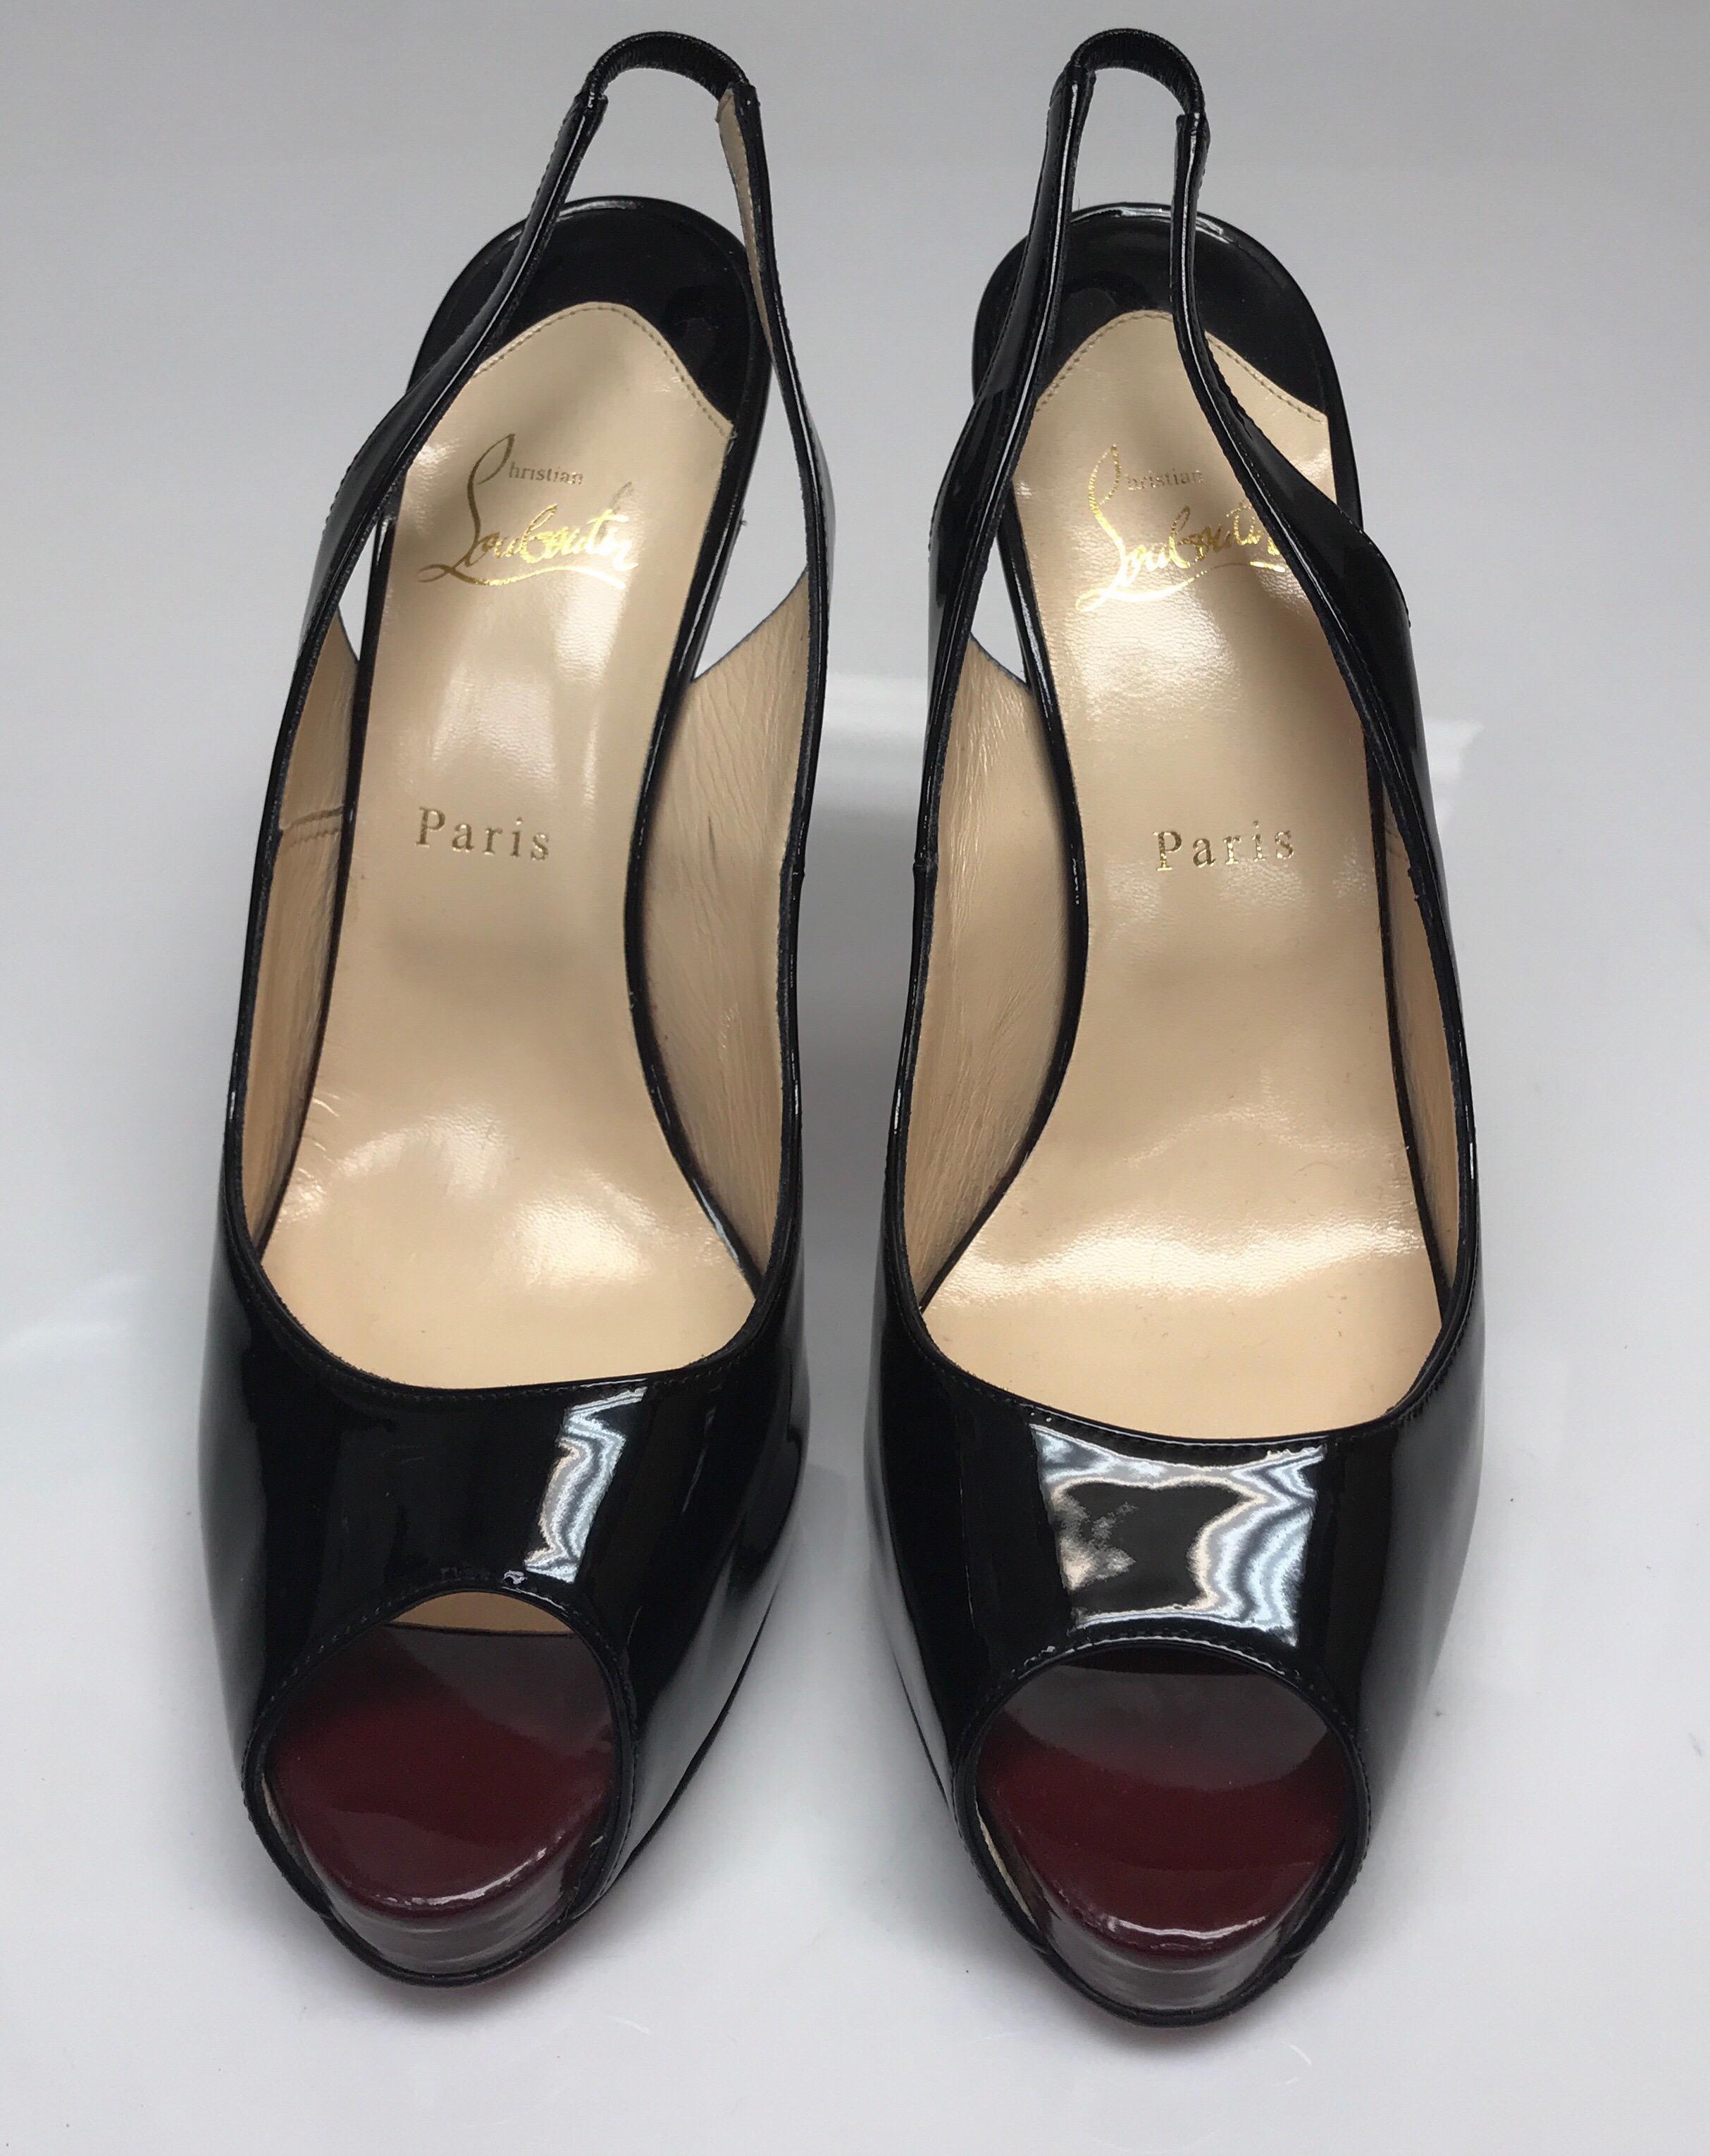 CHRISTIAN LOUBOUTIN Black Patent Peep toe Slingback Heels-42. These beautiful Christian Louboutin Heels are in excellent condition. They have never been worn and have no marking or sign of use. The outside is made of a black patent leather and the